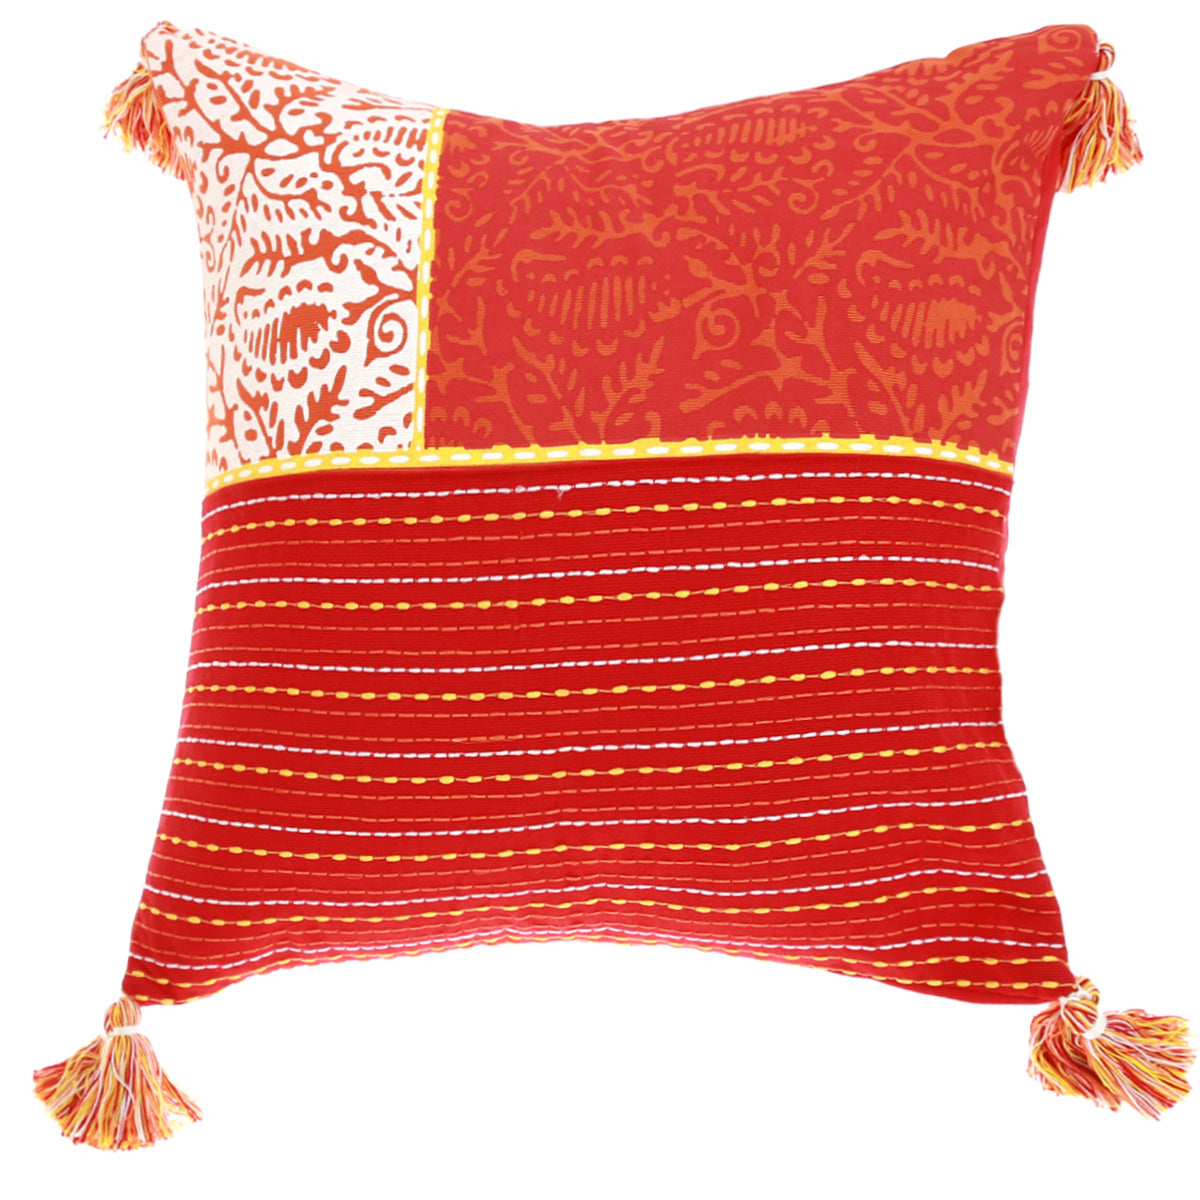 Patch Kantha Cushion Cover 18"x18"